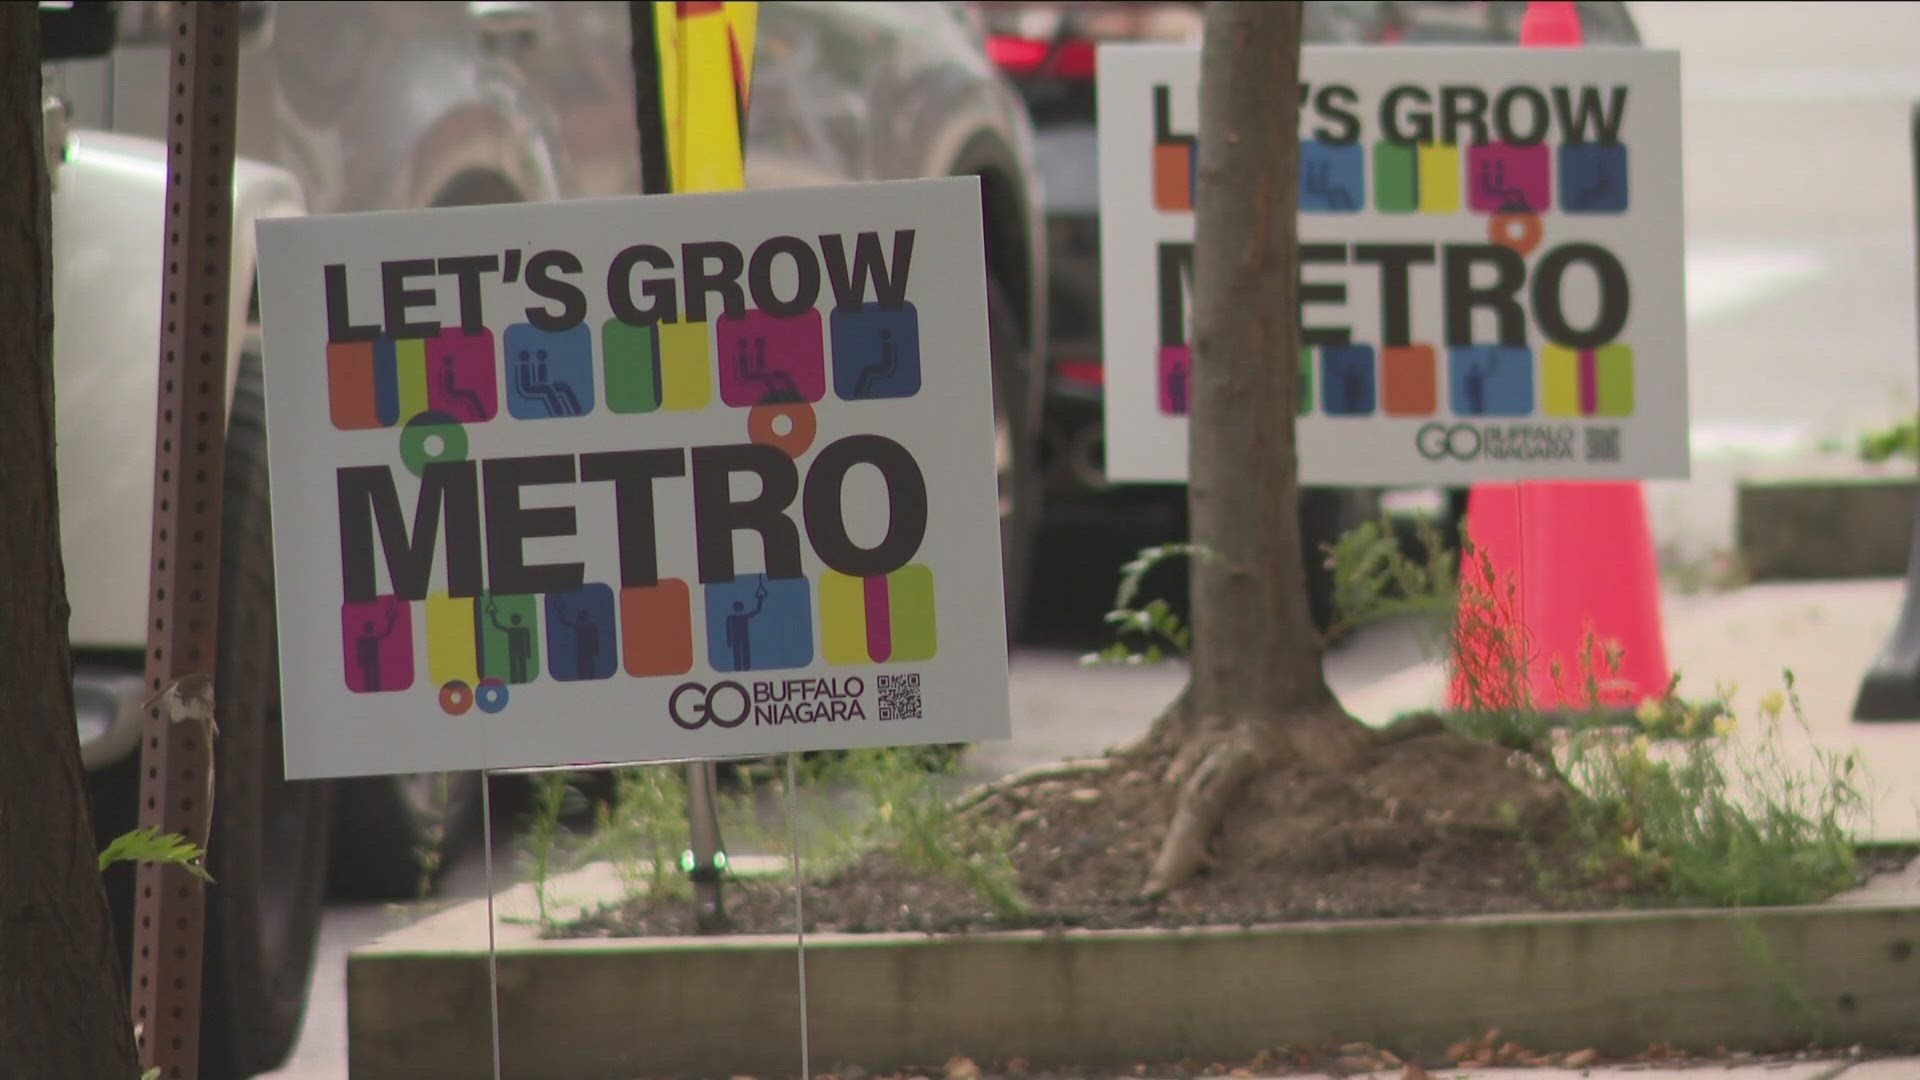 The group urges the public to support the expansion of the NFTA Metro.